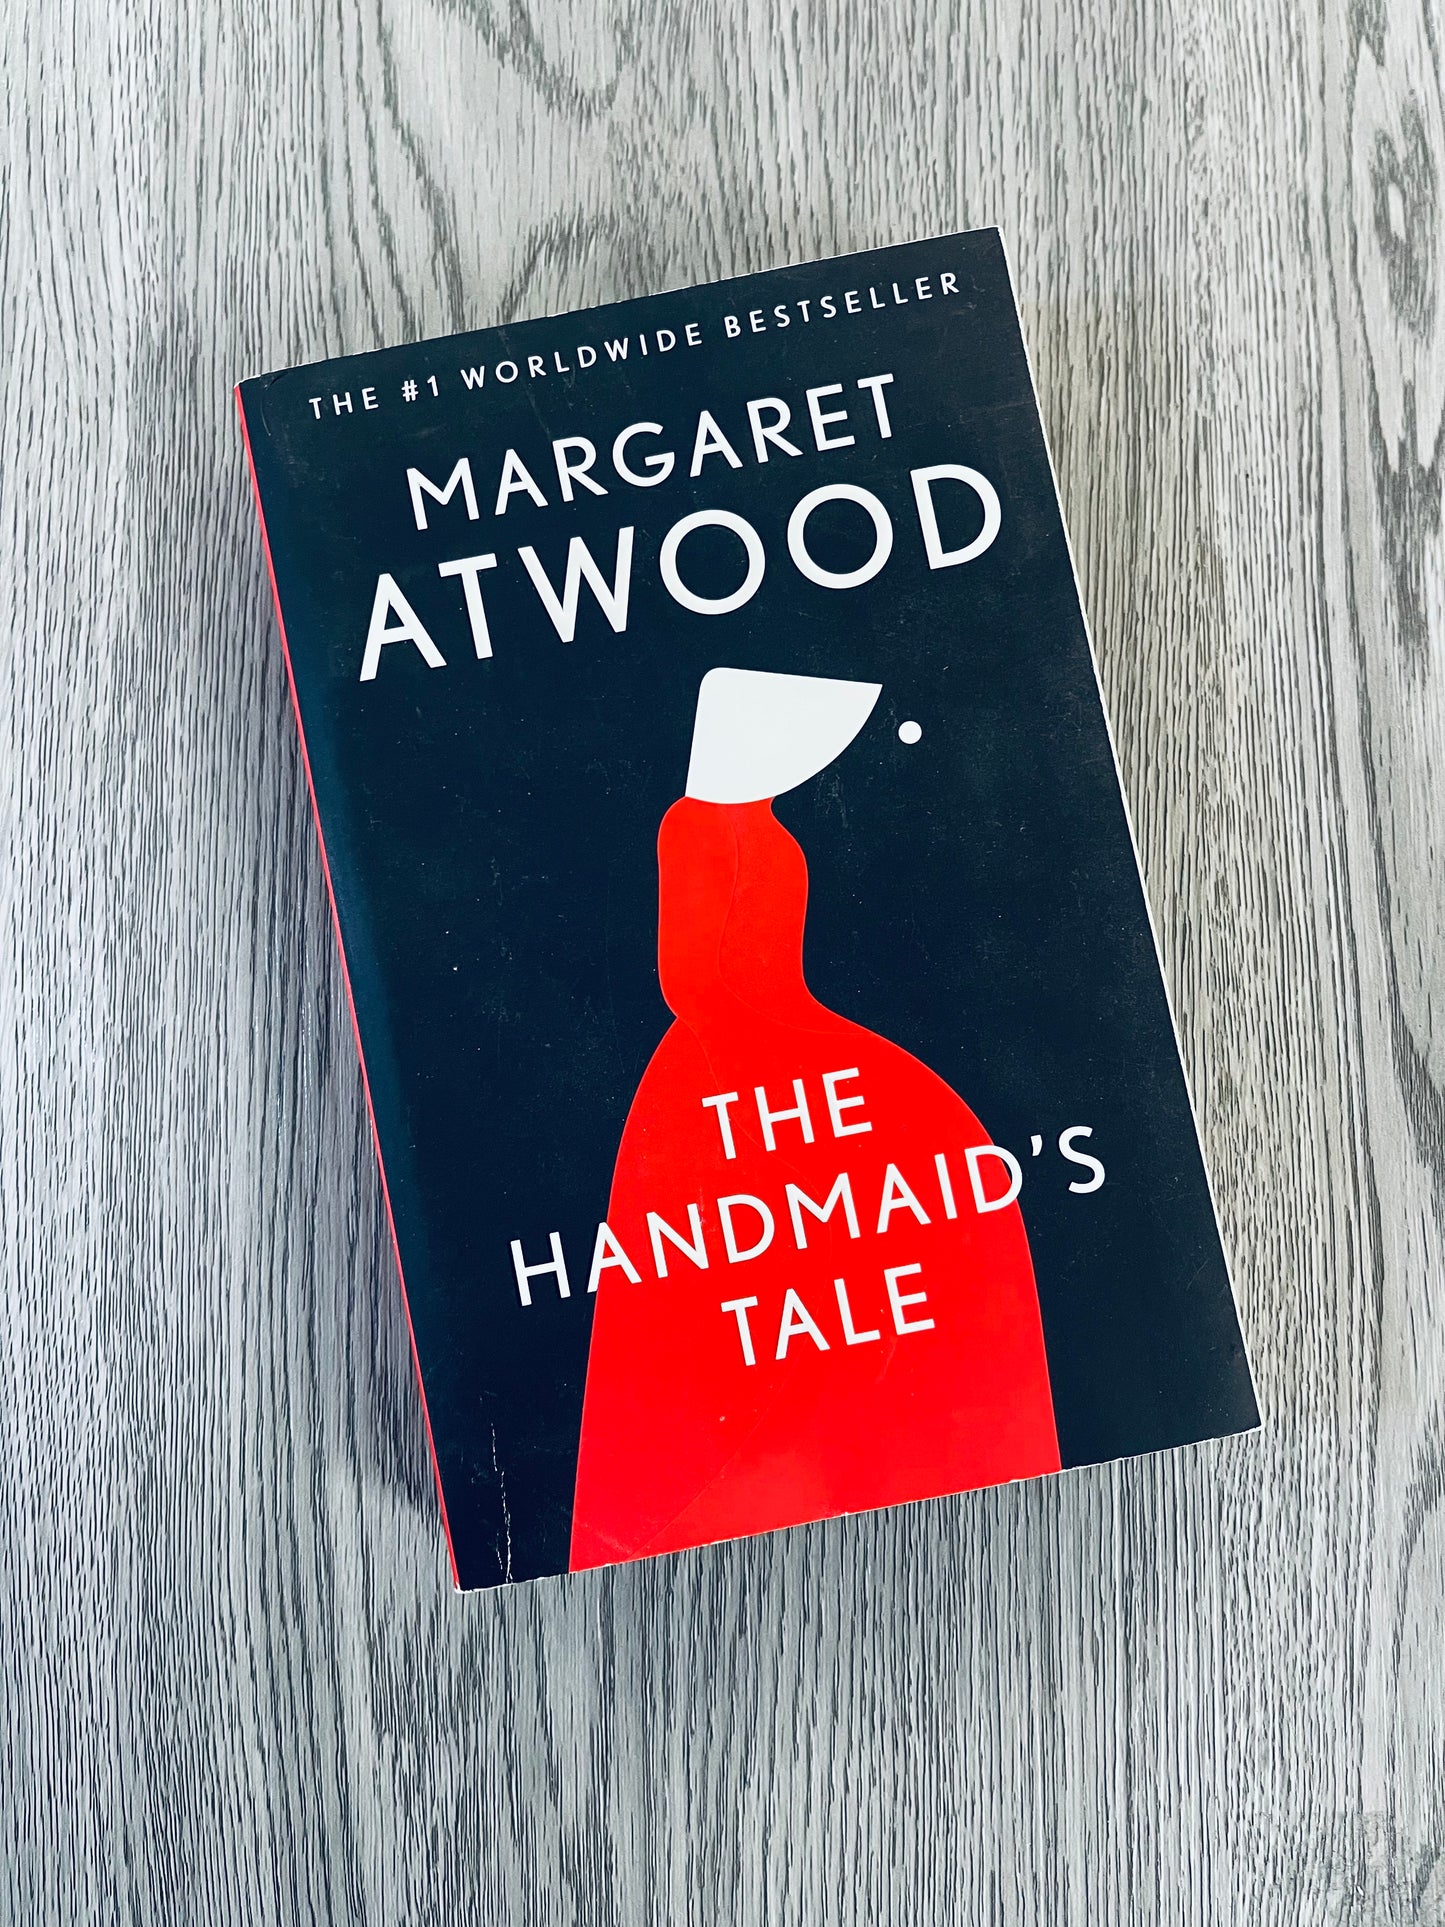 The Handmaids Tale (The Handmaids Tale #1) by Margaret Atwood